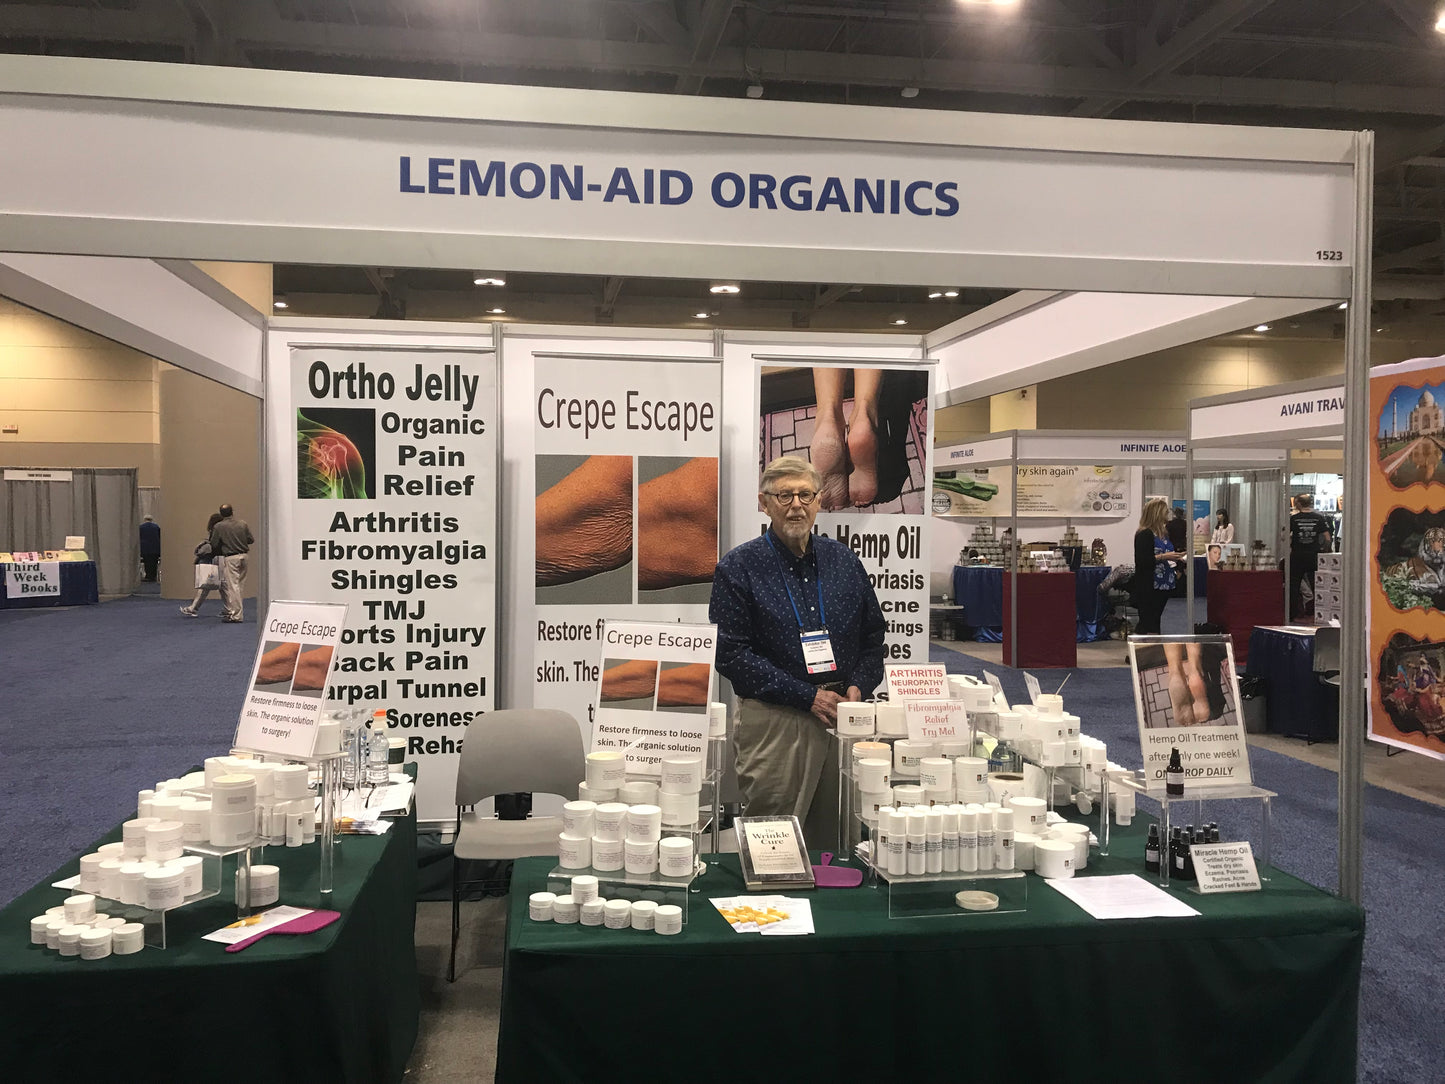 Ortho Jelly Trade Show